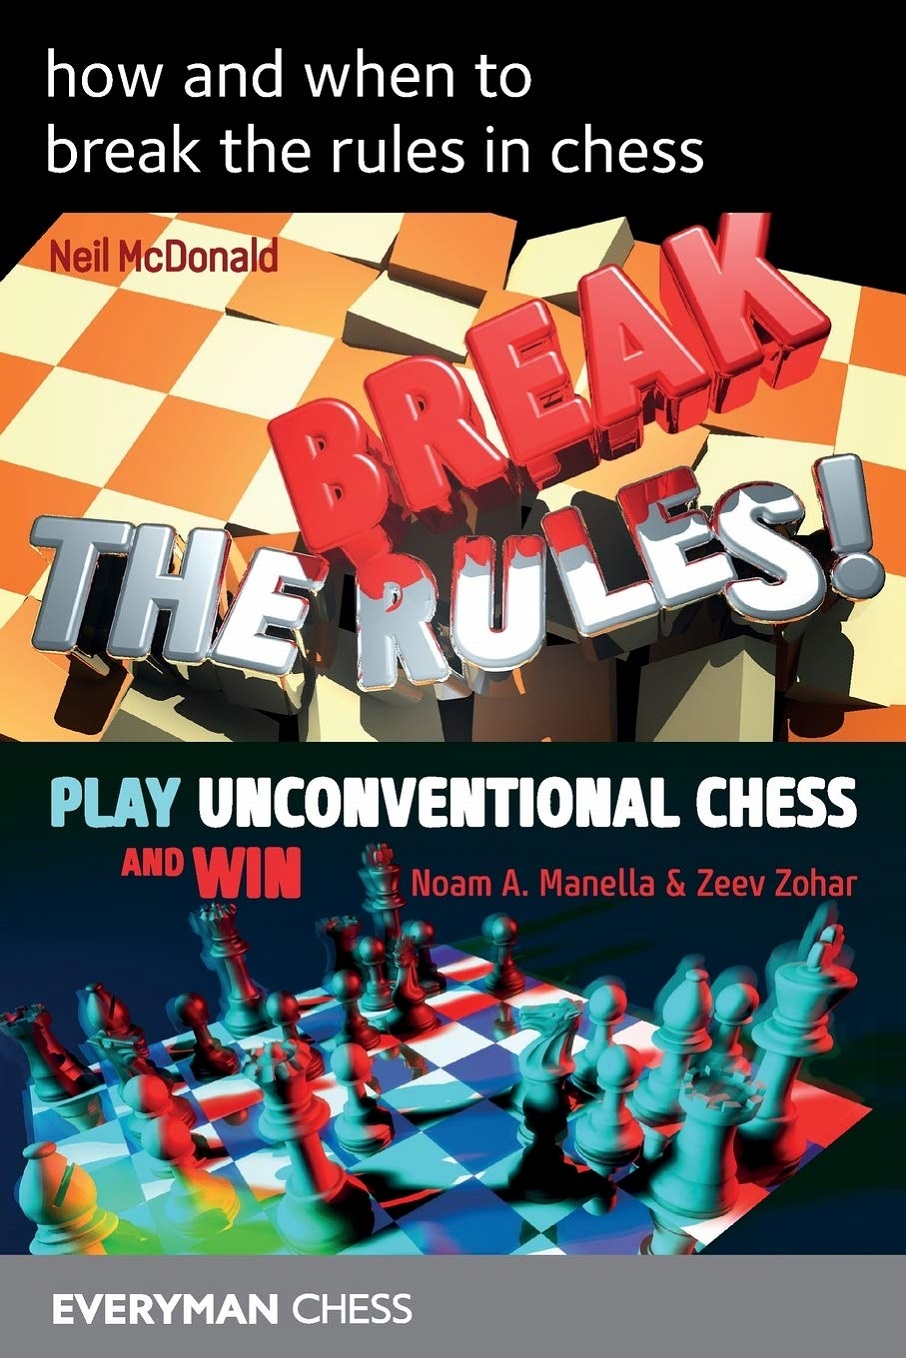 Break the Rules. How and when to break the rules in chess